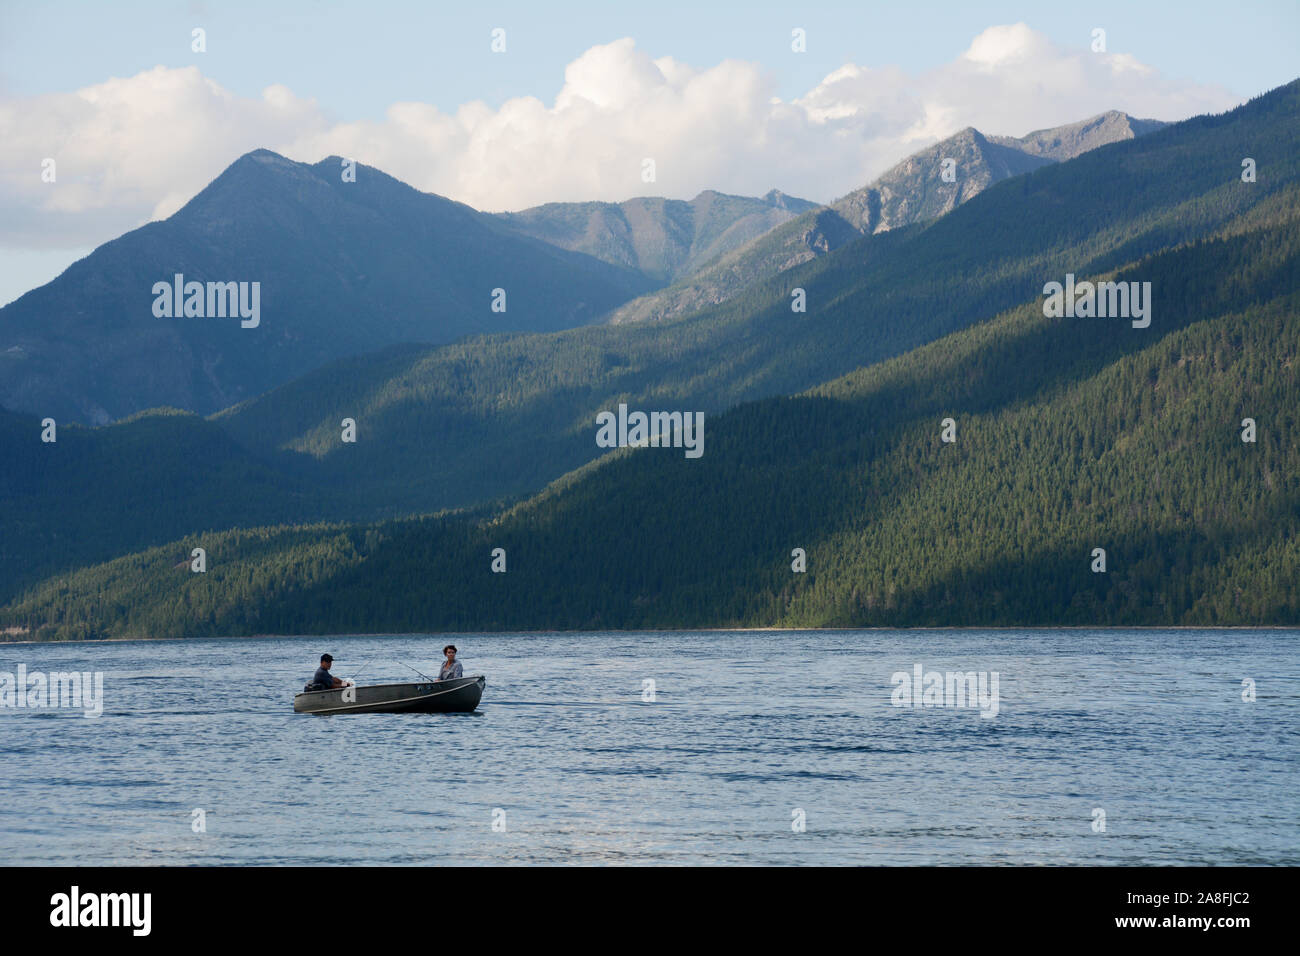 Two people in a motorboat in Kootenay Lake, with the mountains of the Purcell Wilderness Conservancy in the background, British Columbia, Canada. Stock Photo